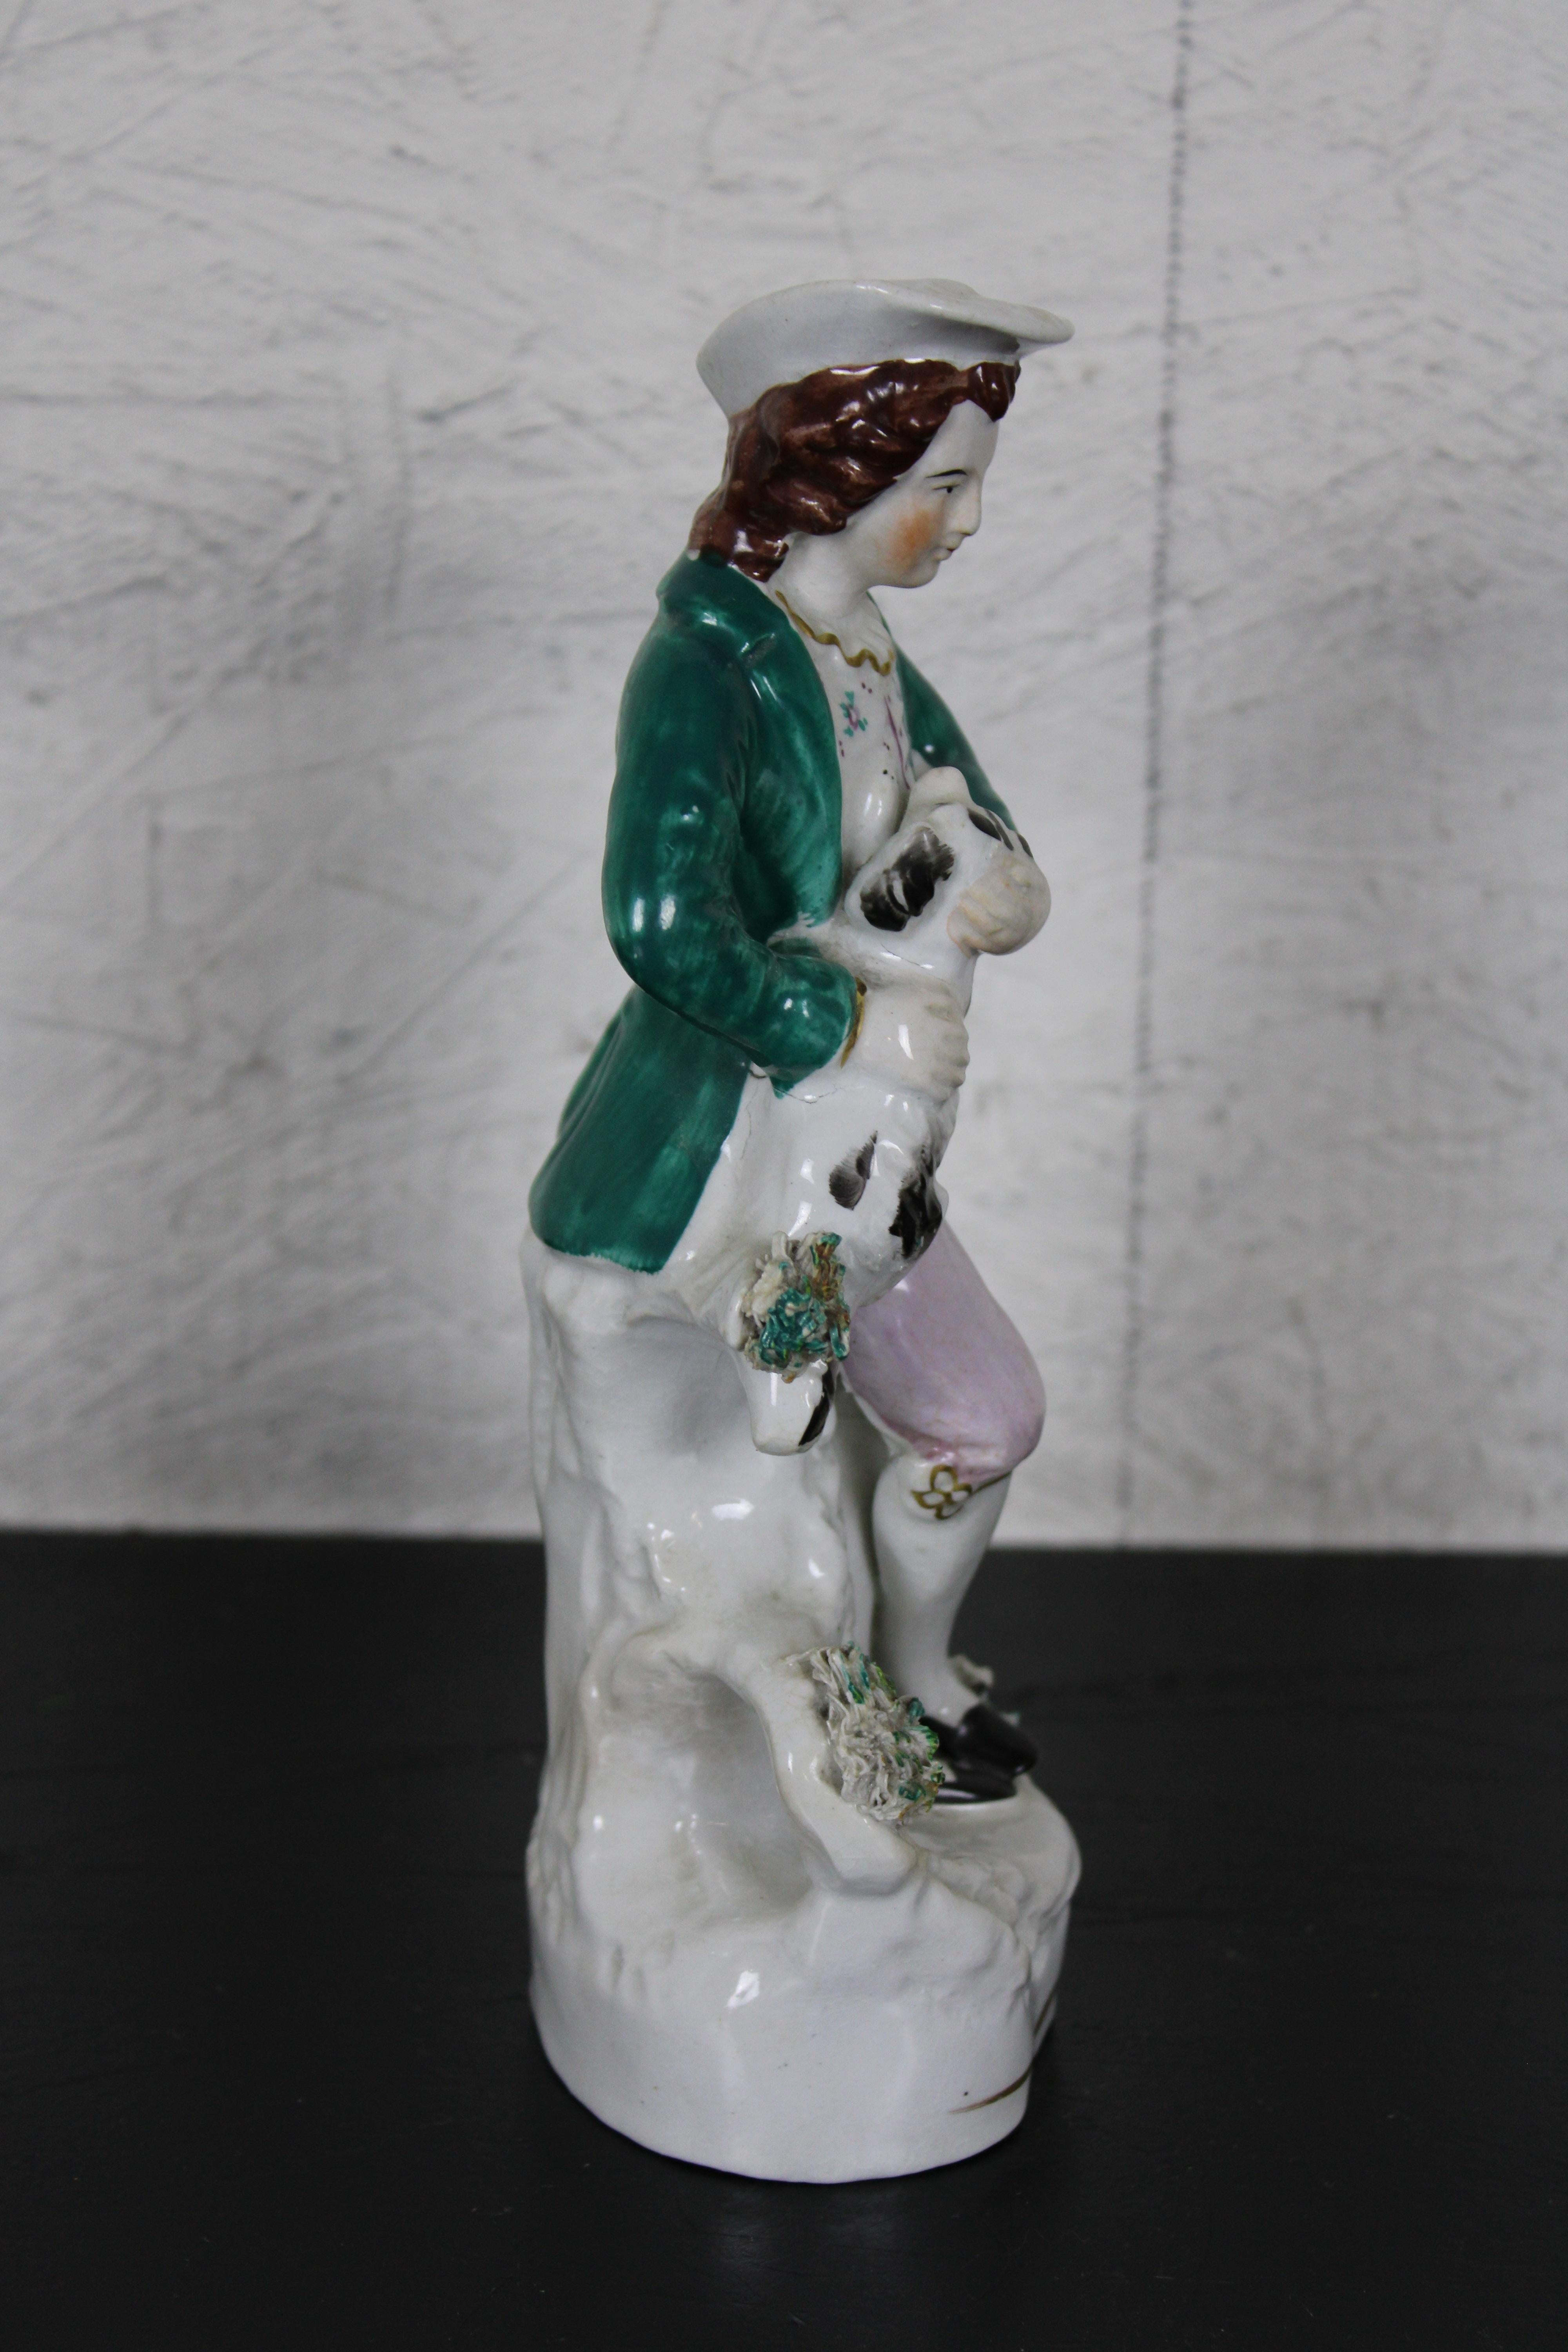 19th Century Antique English Staffordshire Porcelain Figurine Man with Spotted Dog